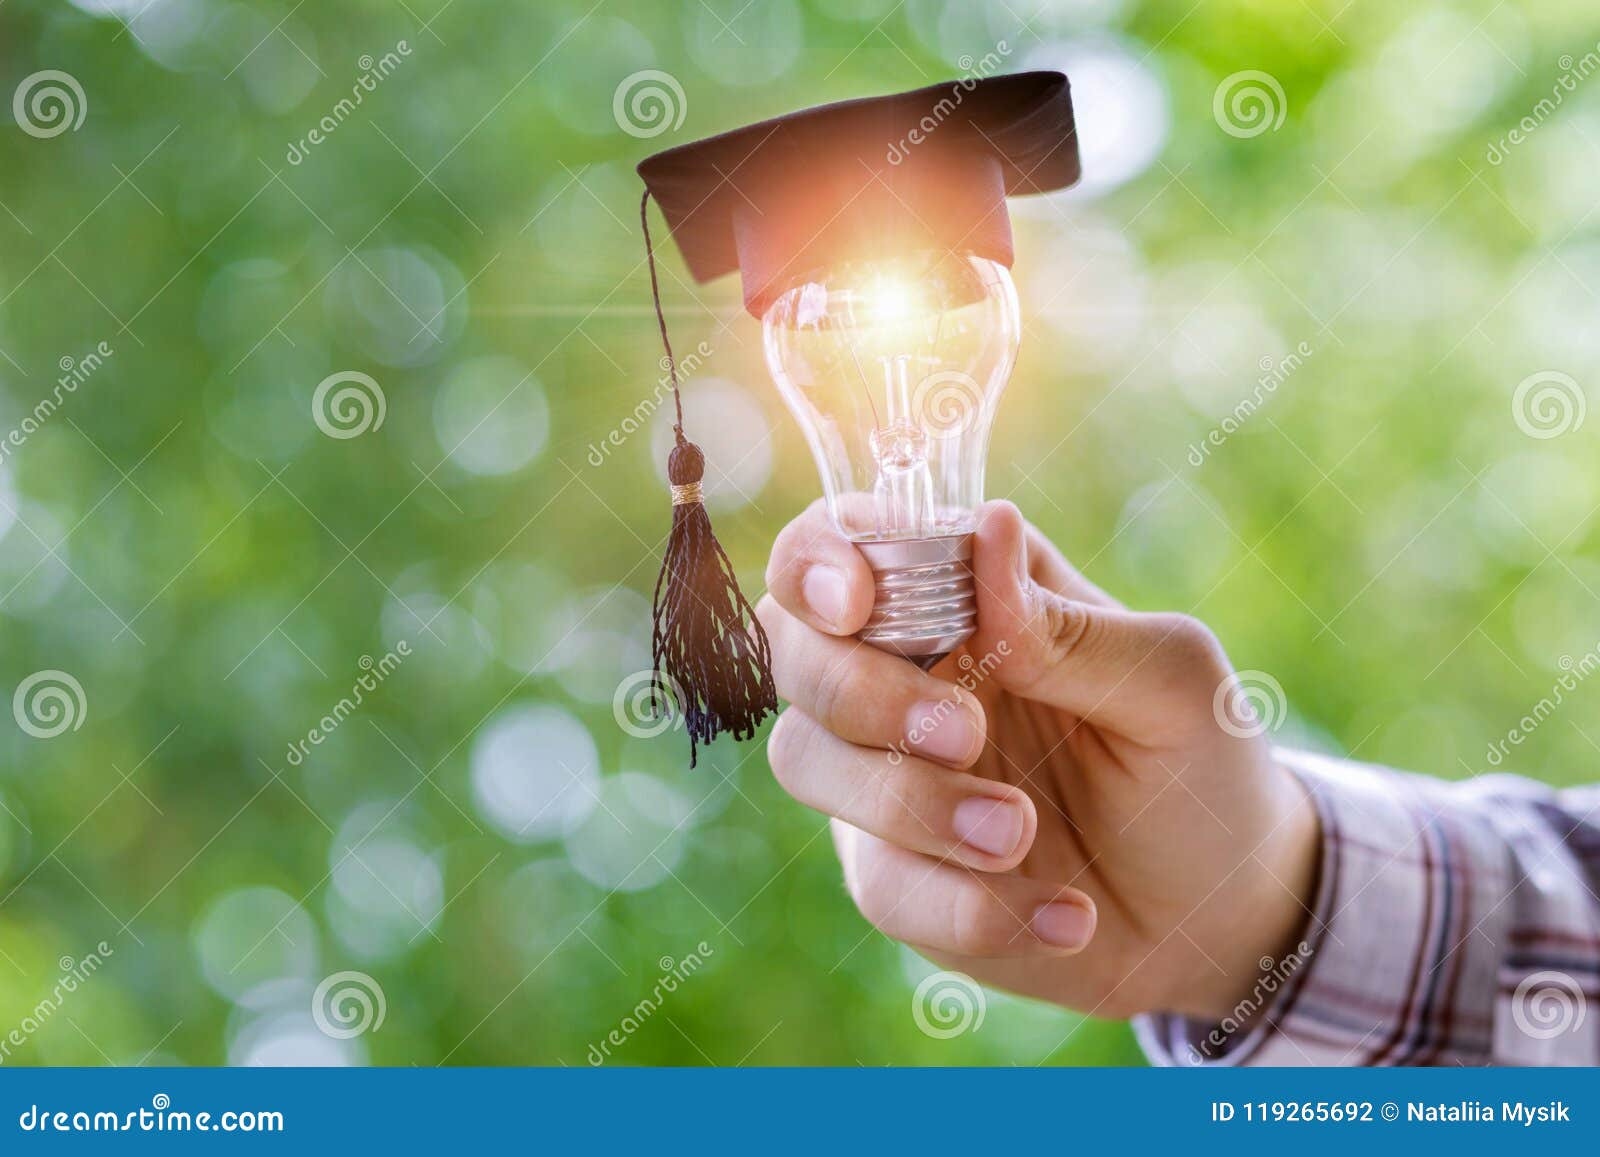 hand shows light bulb in the cap academic .